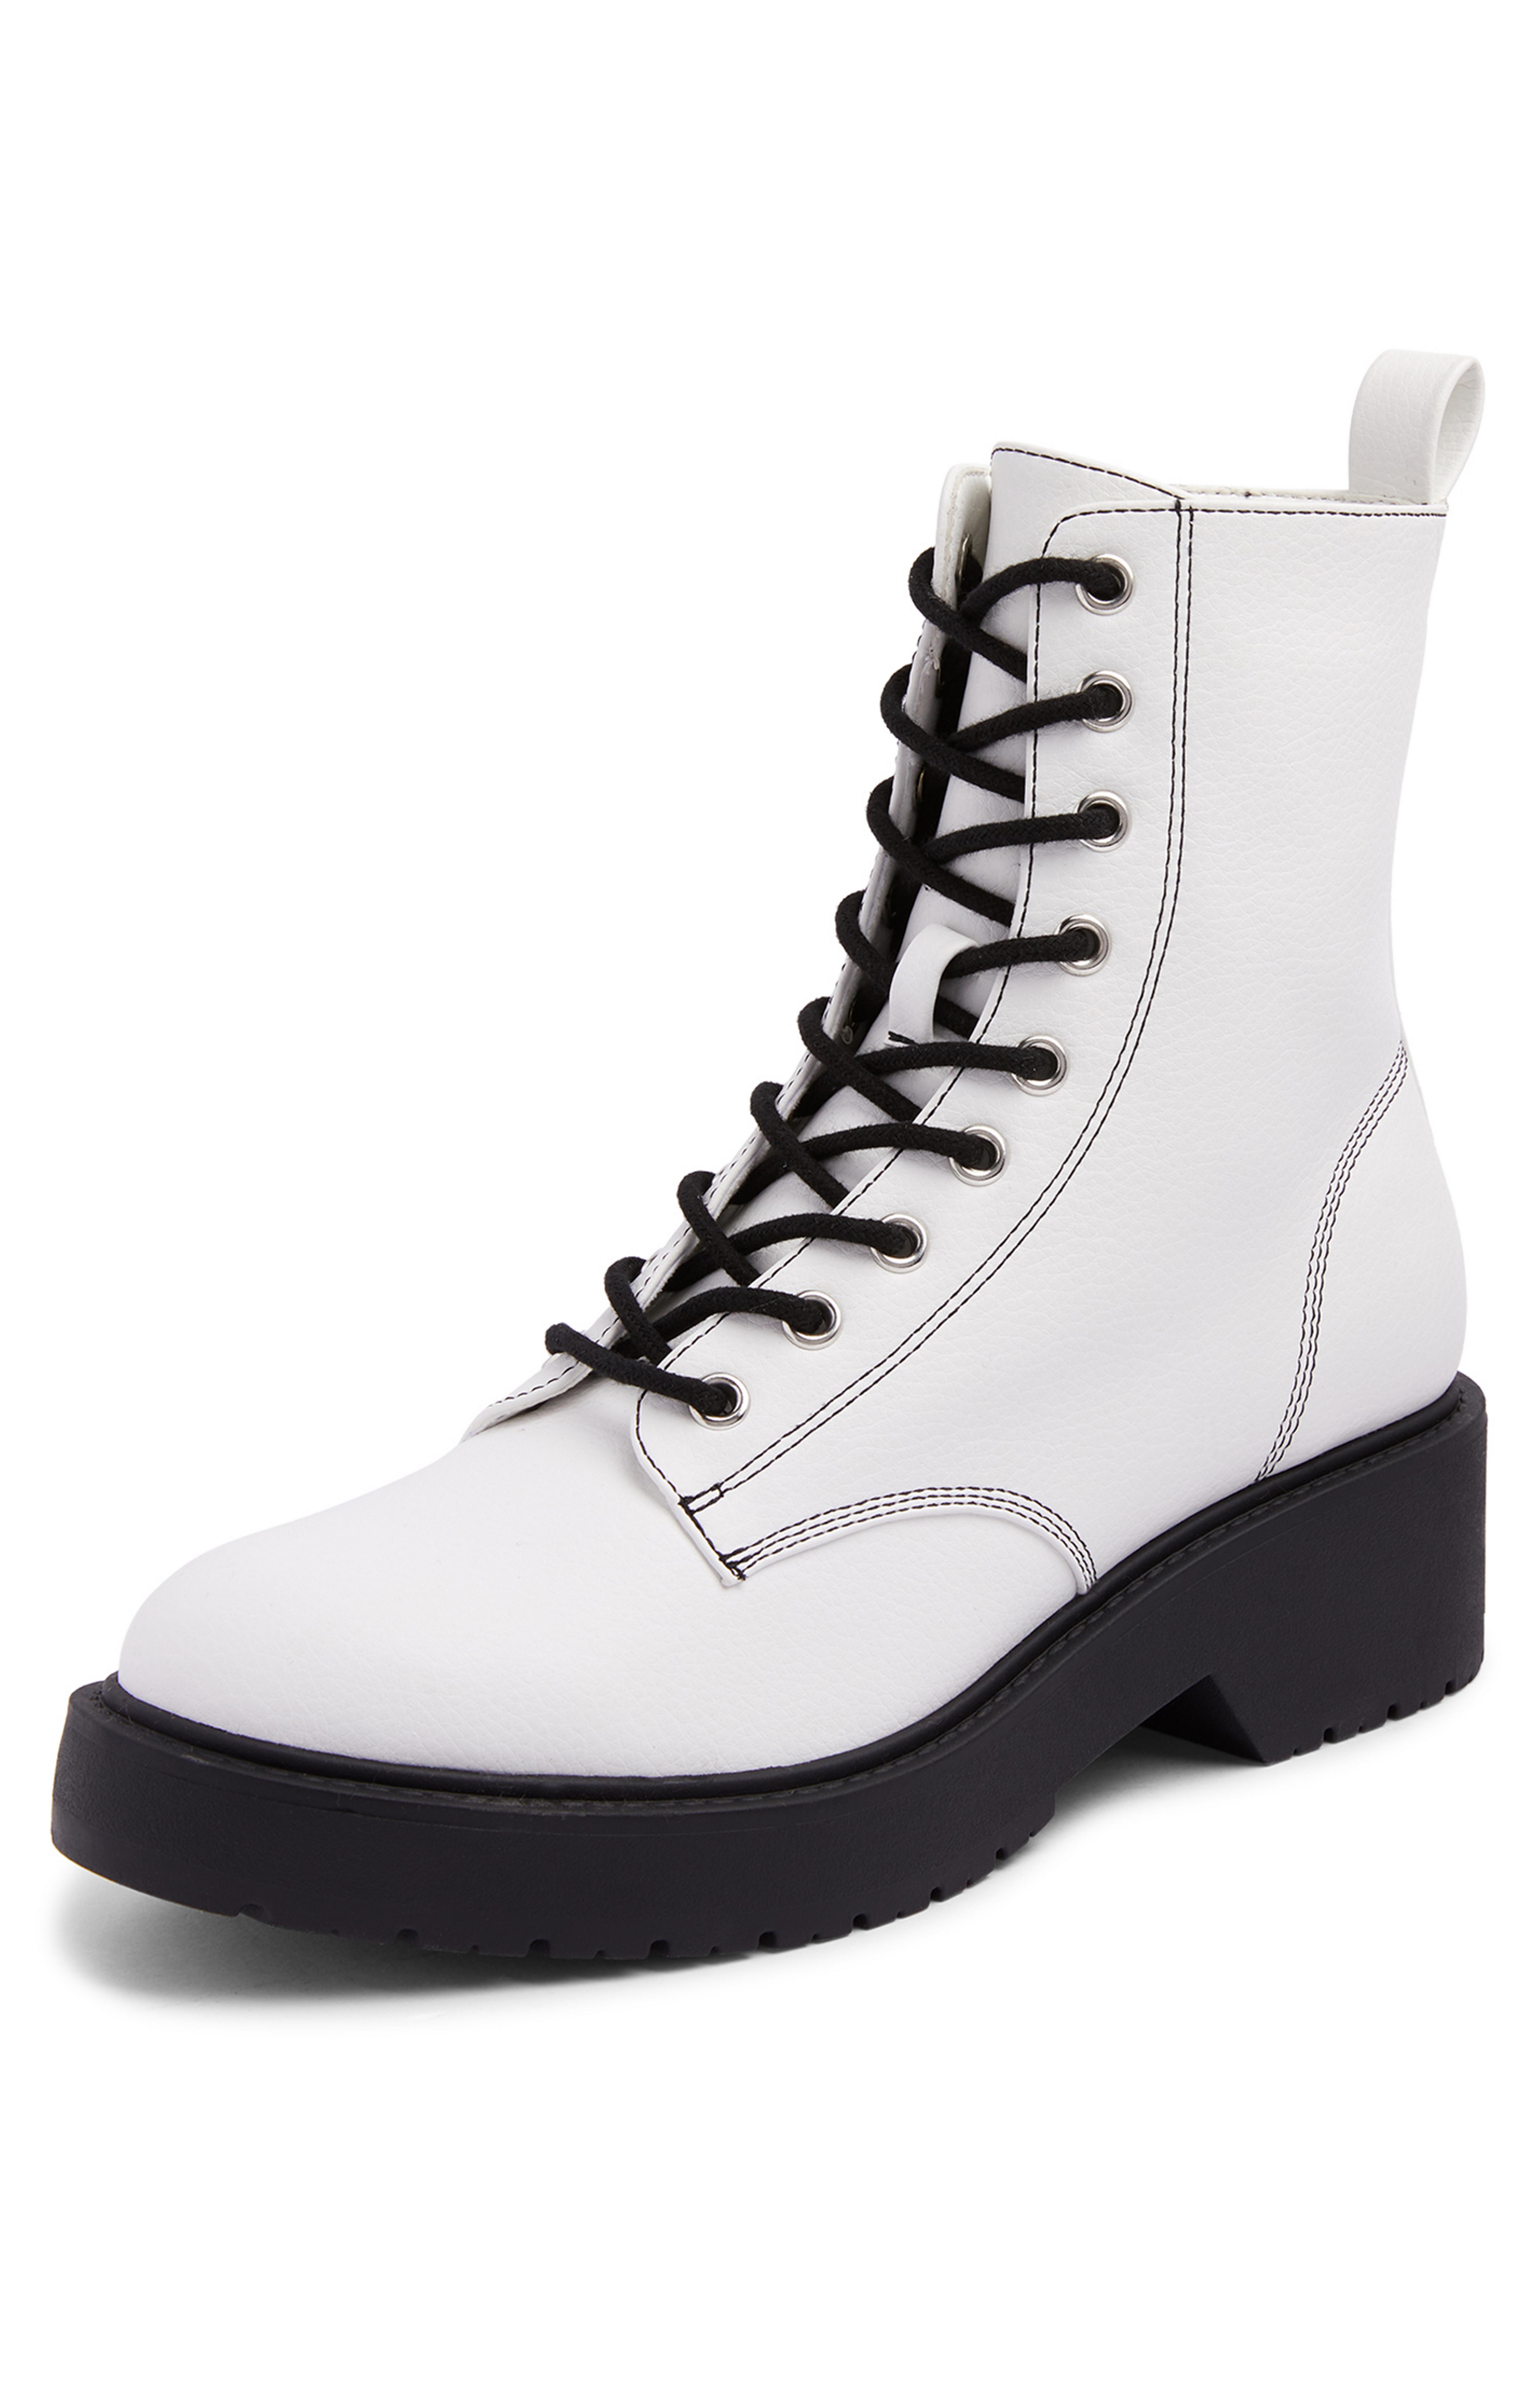 primark white ankle boots